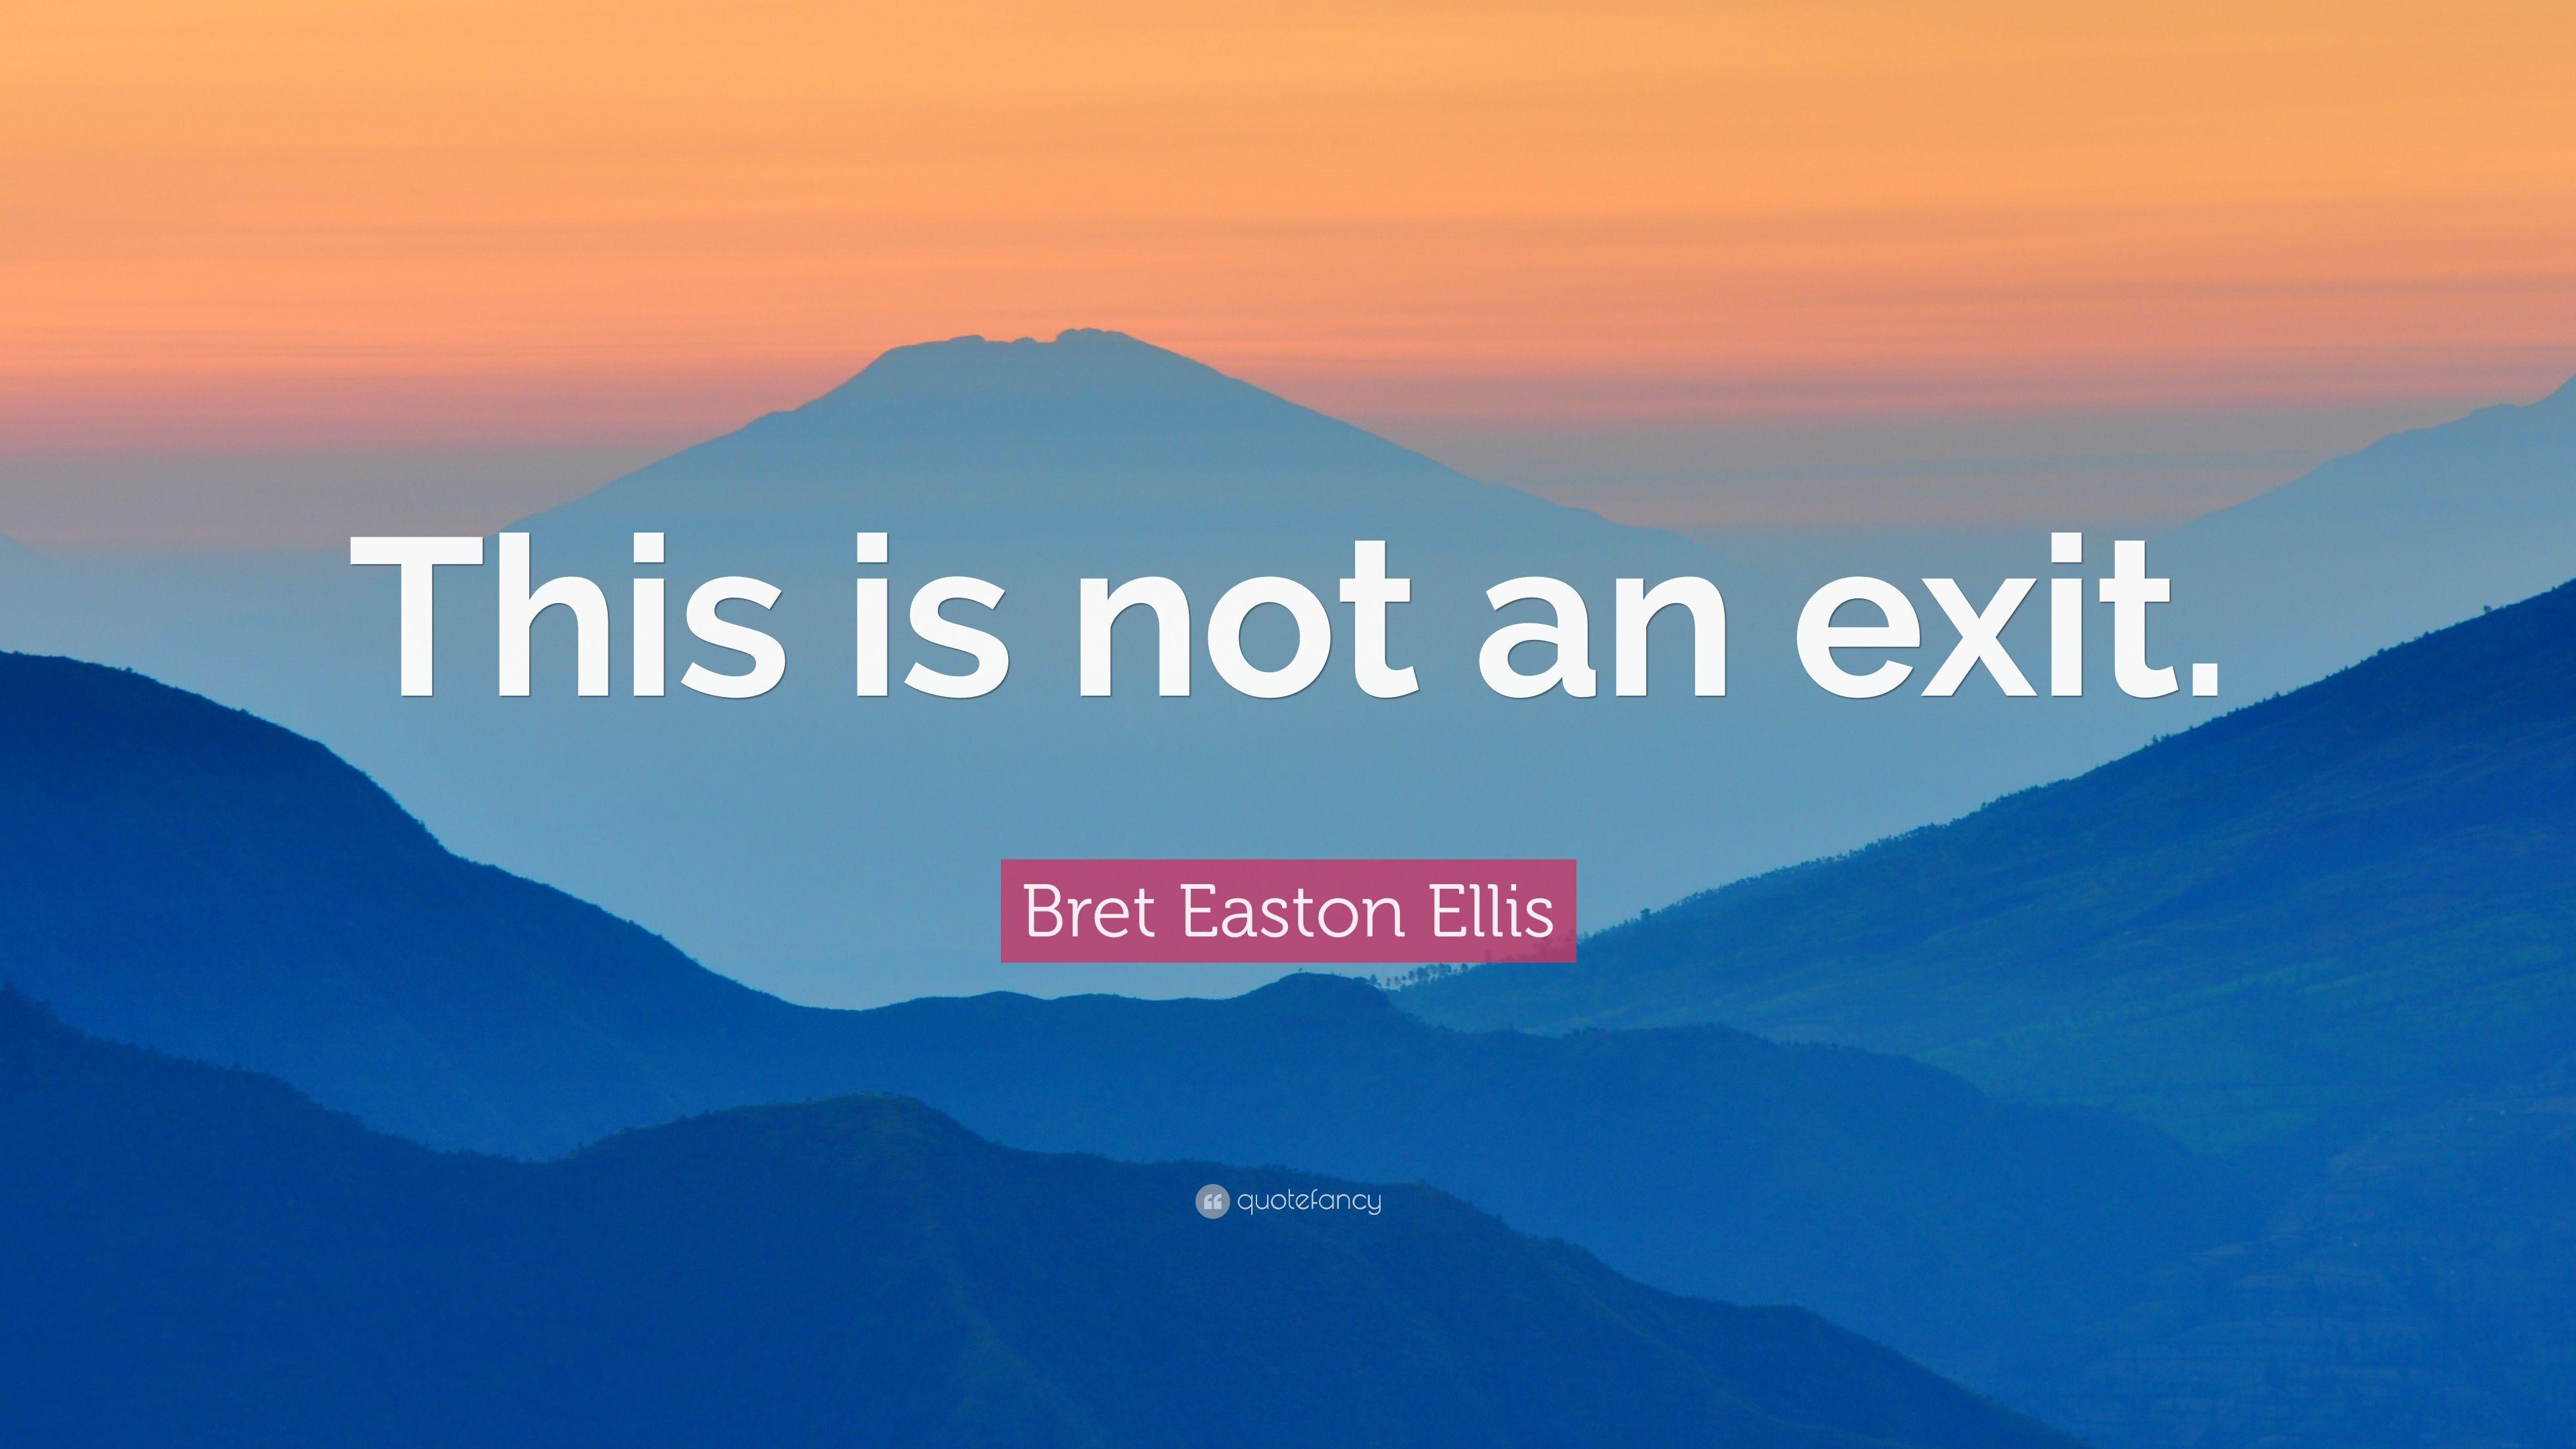 Bret Easton Ellis Quote: “This is not an exit.” 7 wallpaper